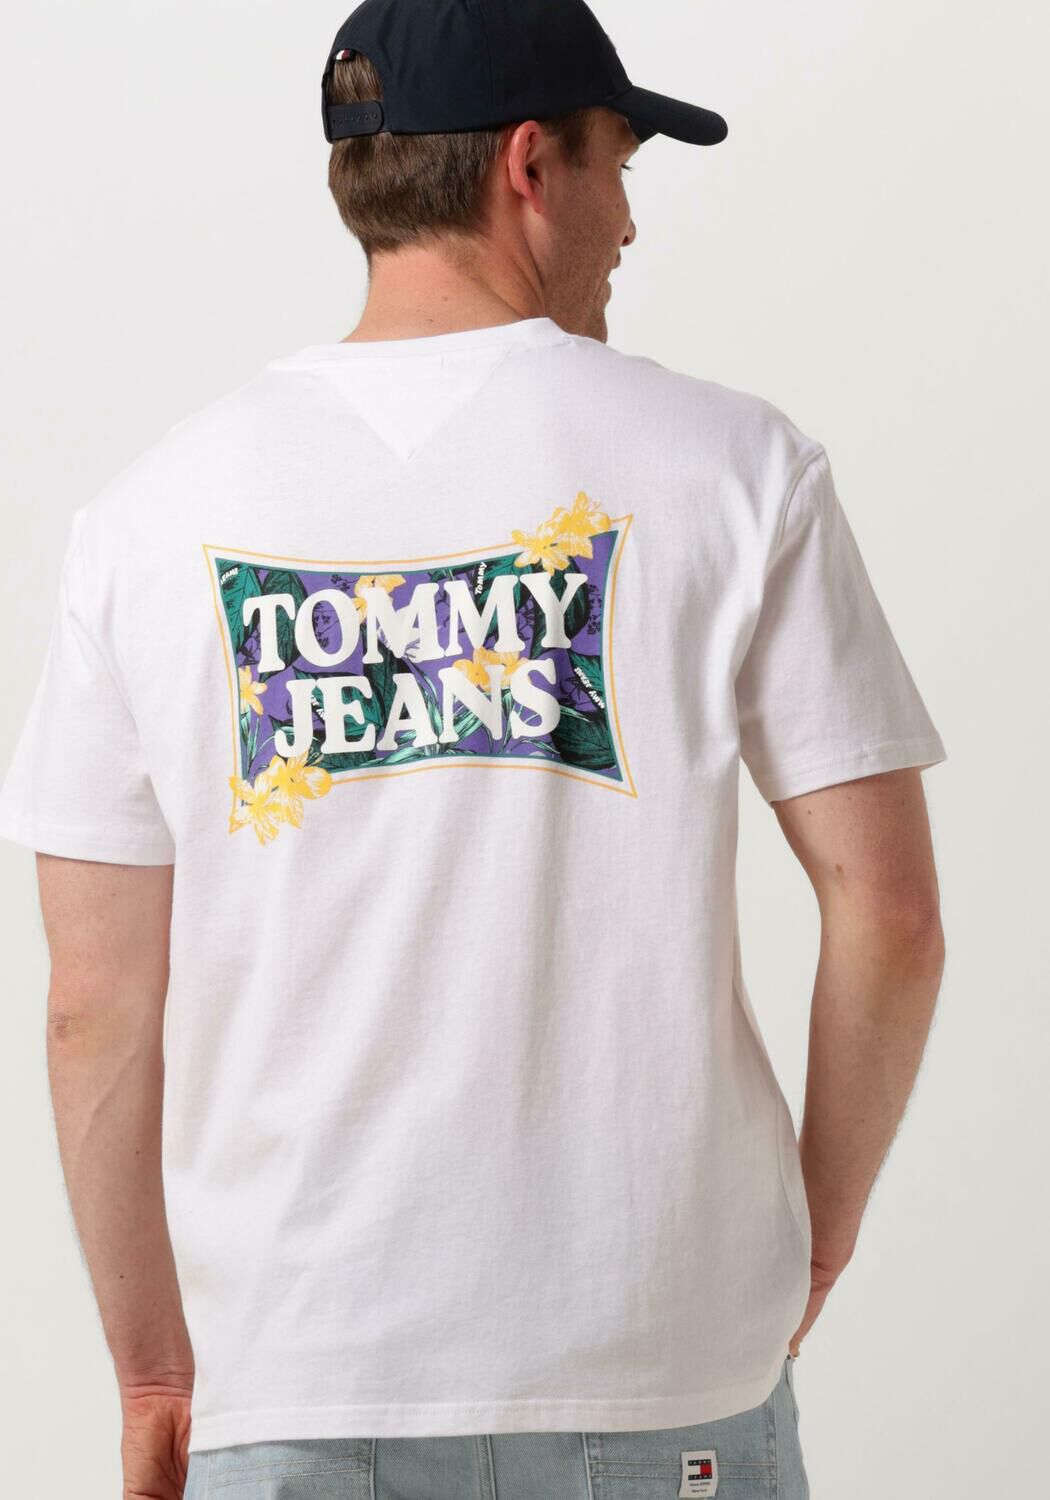 TOMMY JEANS Heren Polo's & T-shirts Tjm Reg Flower Power Tee Wit